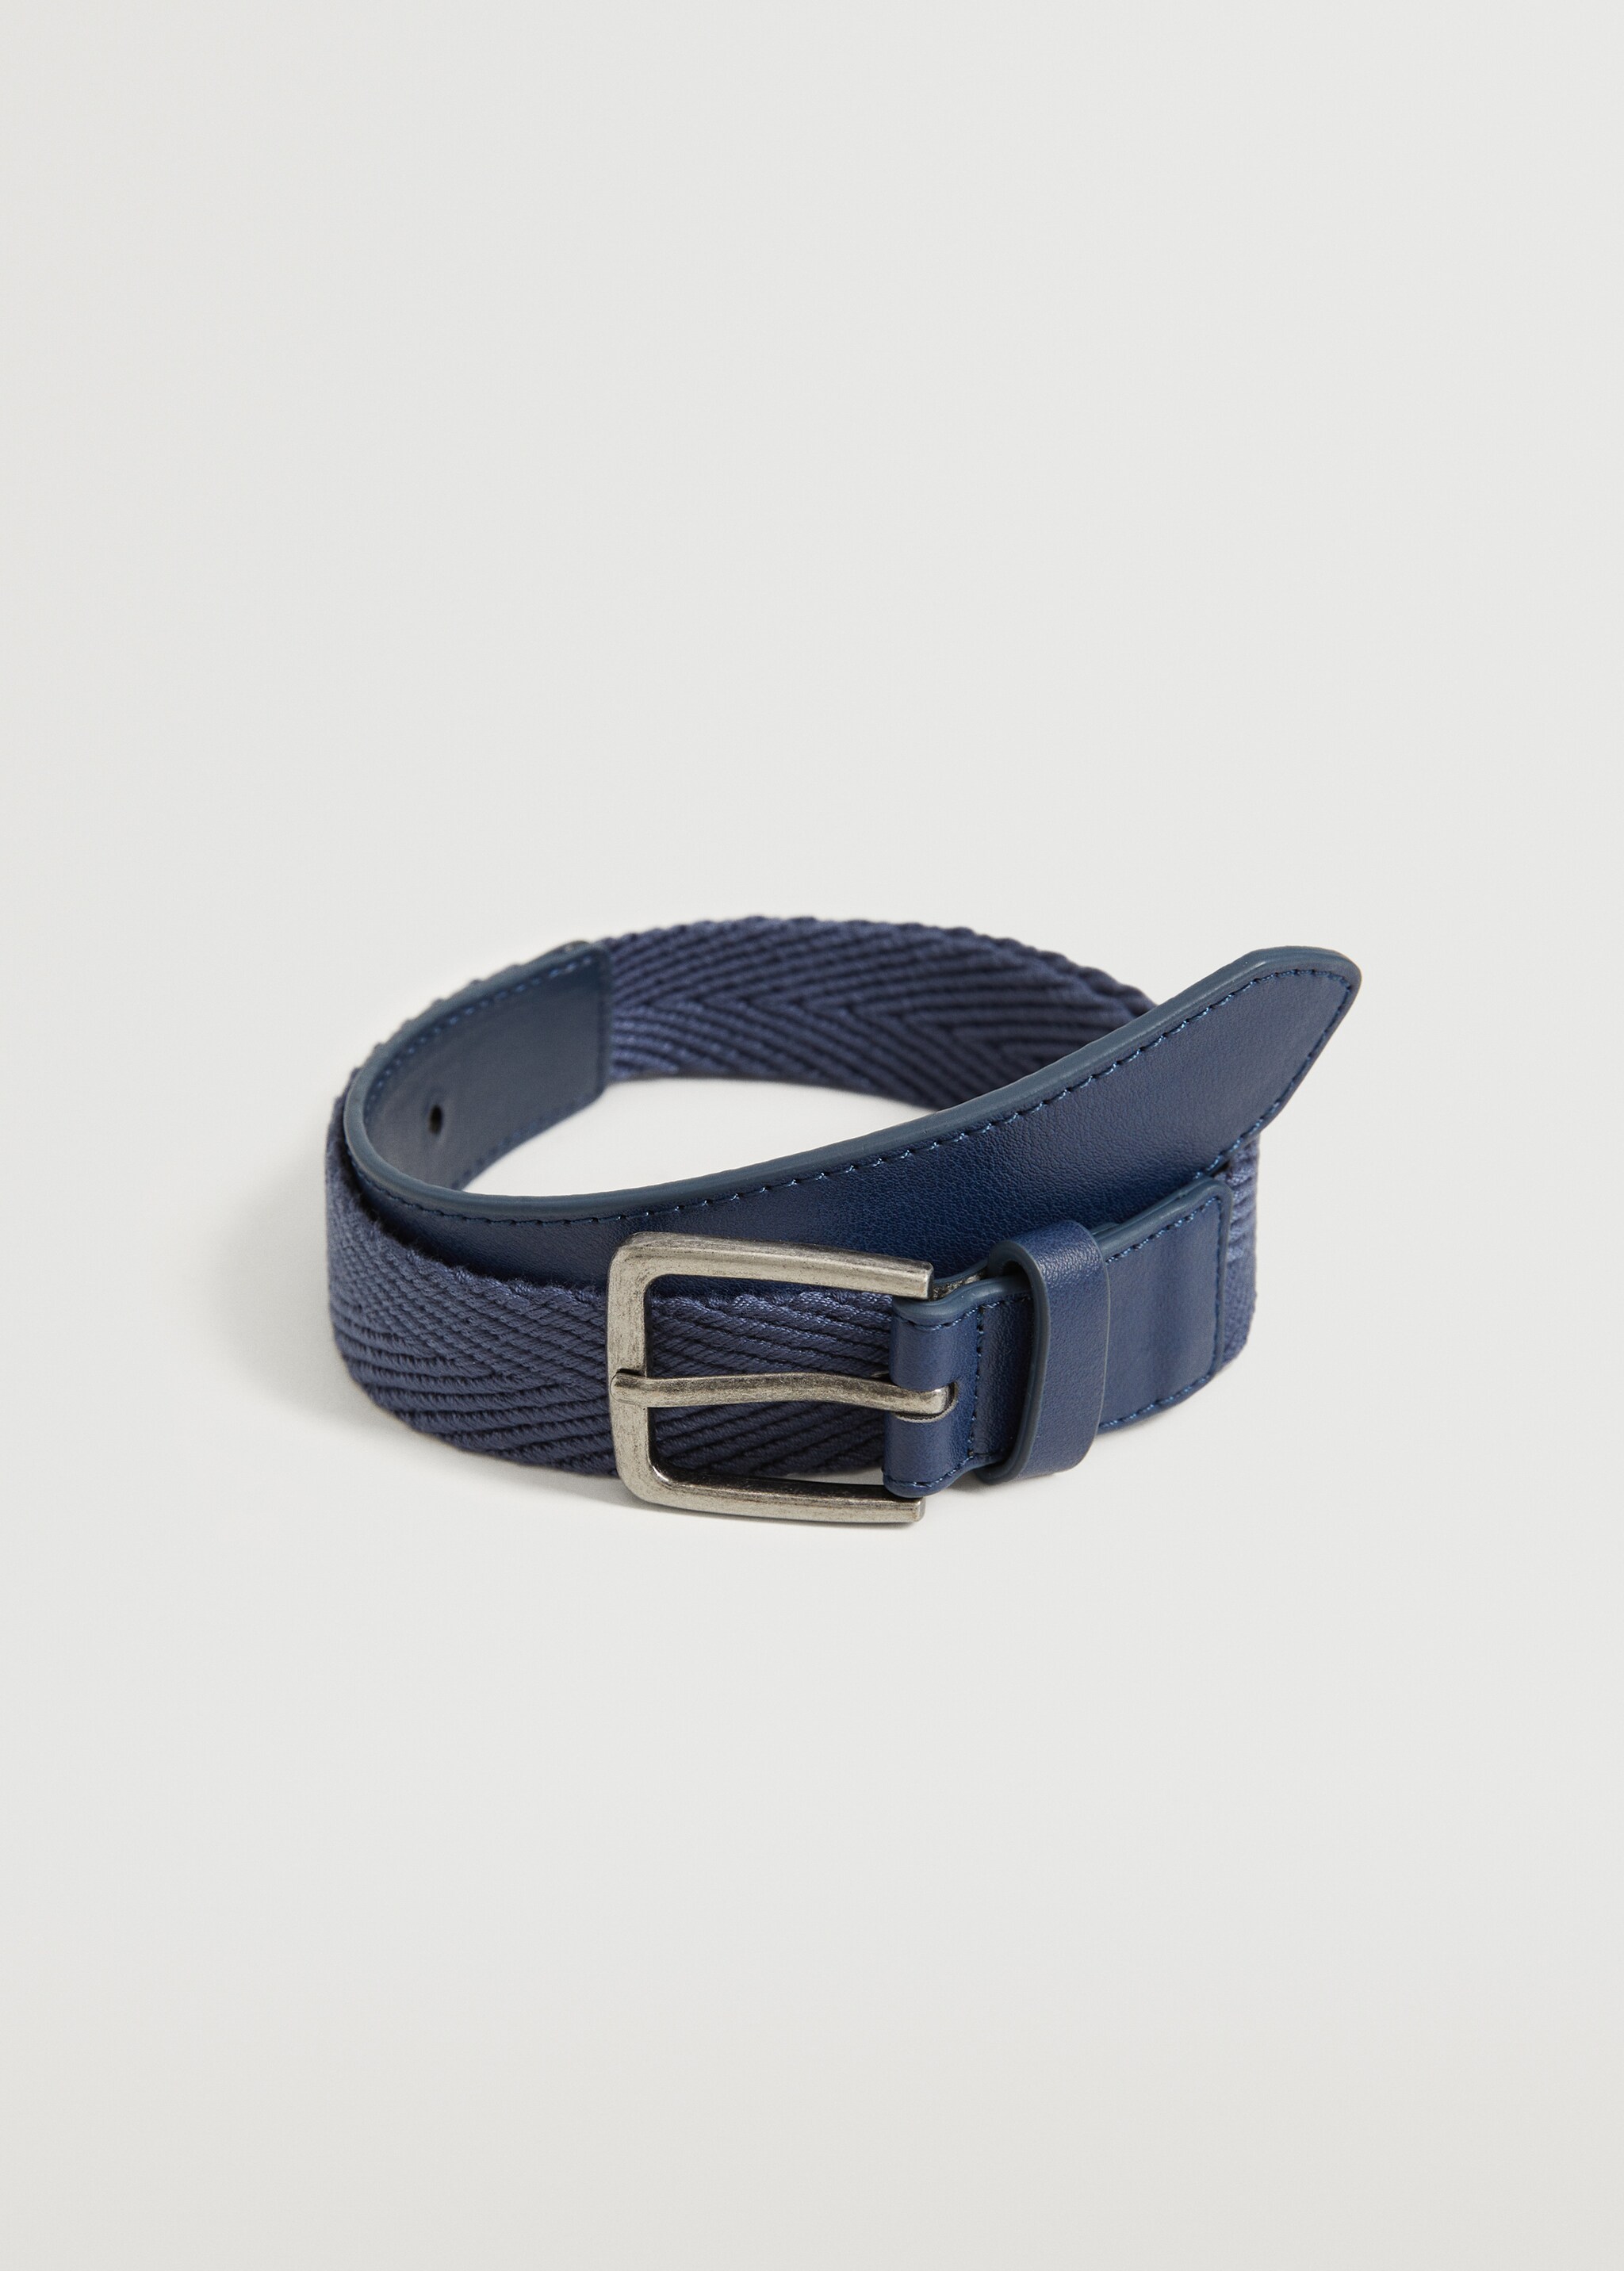 Metal buckle fabric belt - Article without model